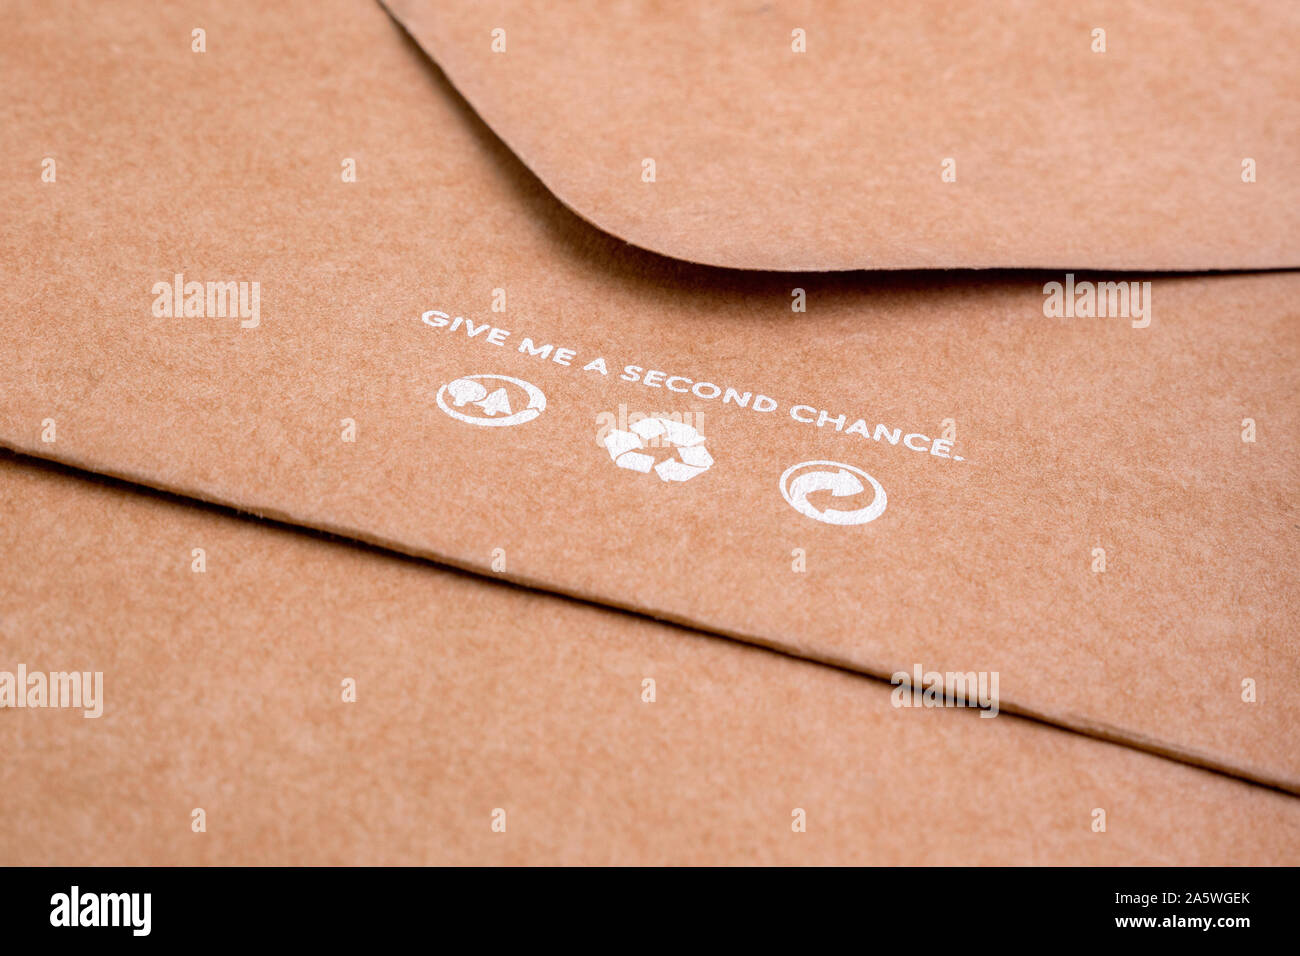 Brown envelope with recycling icons on it. Craft paper for packaging. SAVE PLANET concept. Life standarts concept. Stock Photo